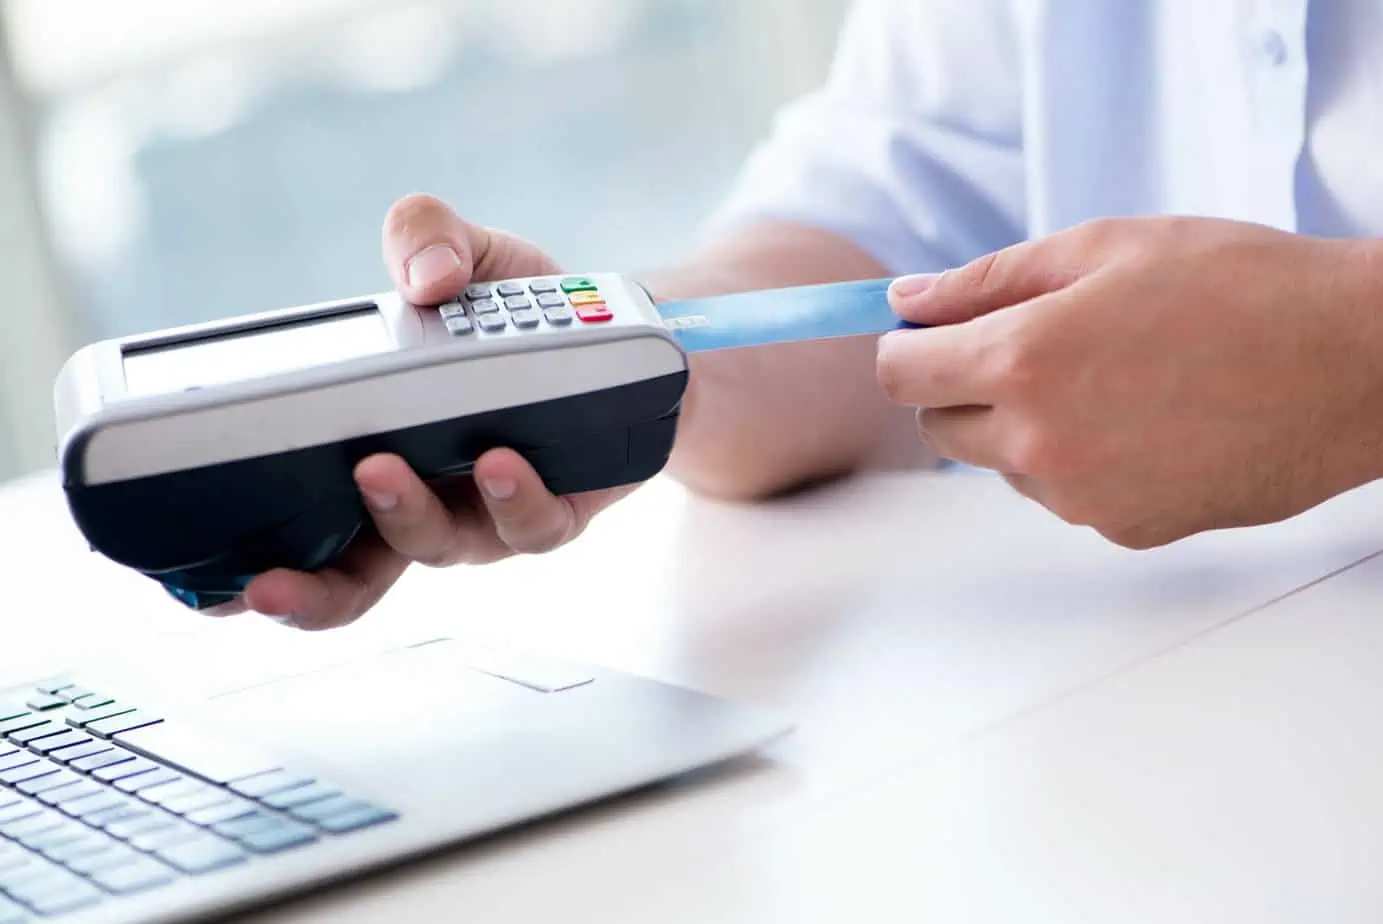 Are Credit Card Processing Fees Part of COGS